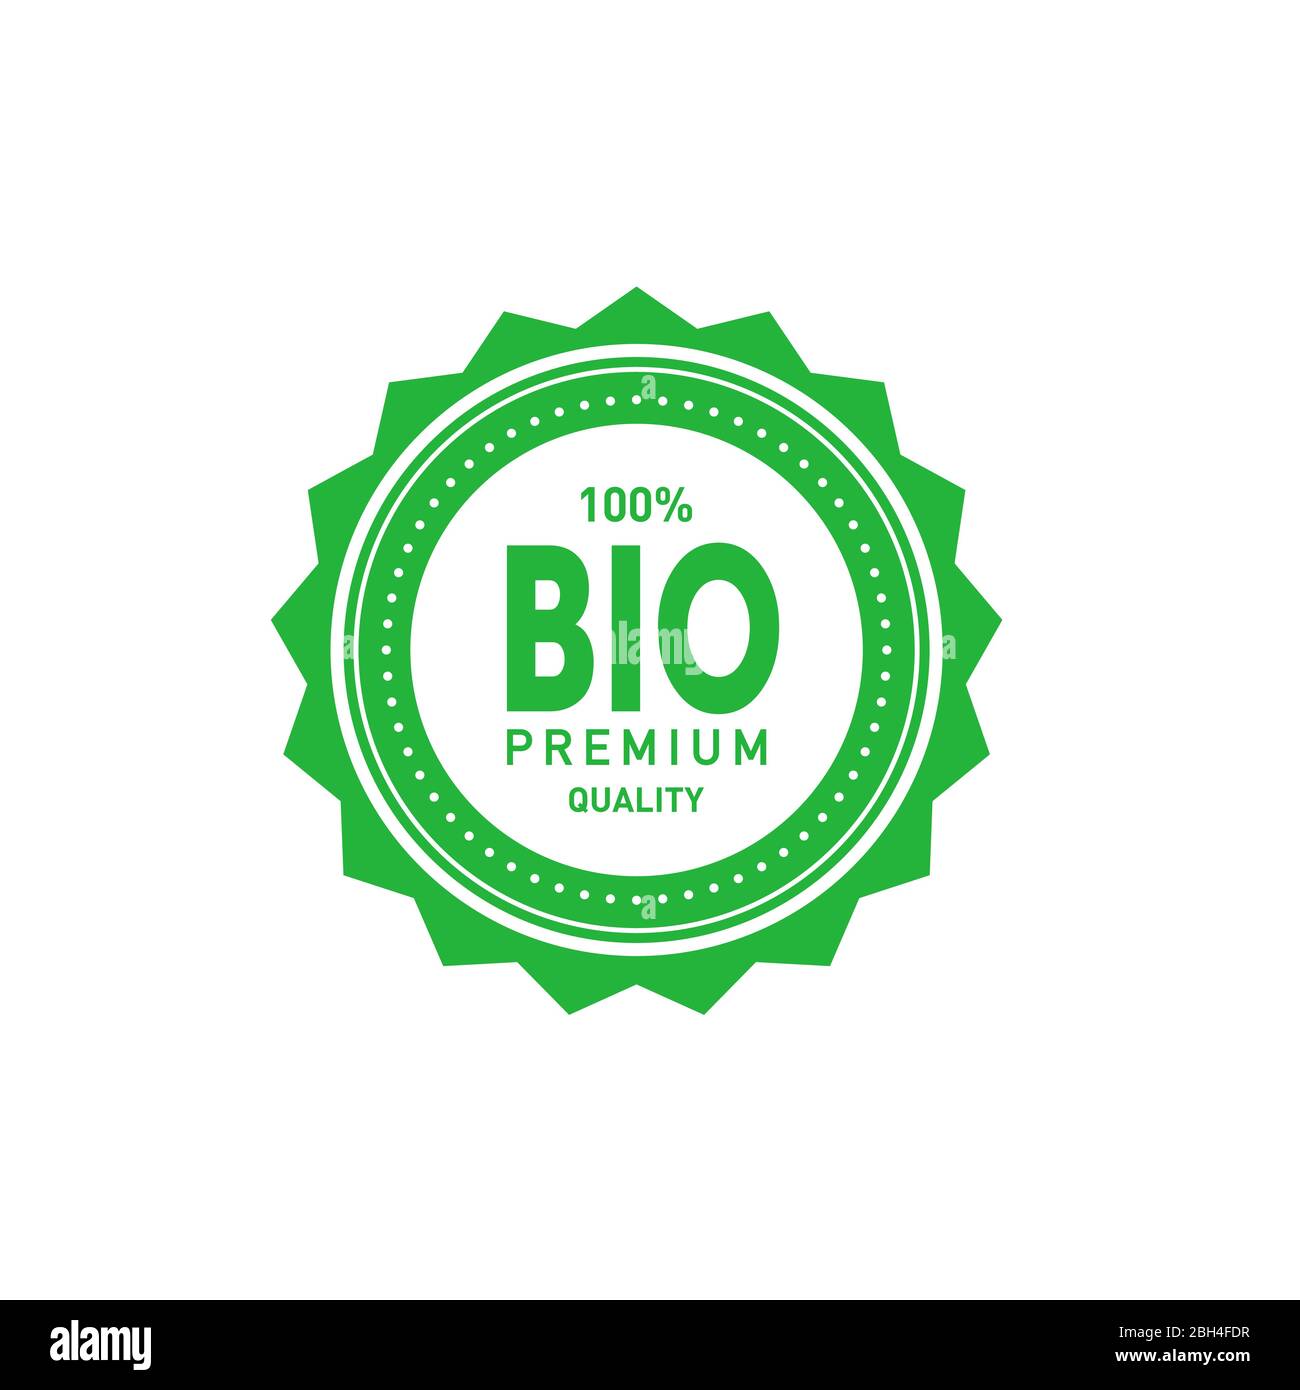 Bio 100 percent premium quality star sticker. Design element for packaging design and promotional material. Vector illustration. Stock Vector